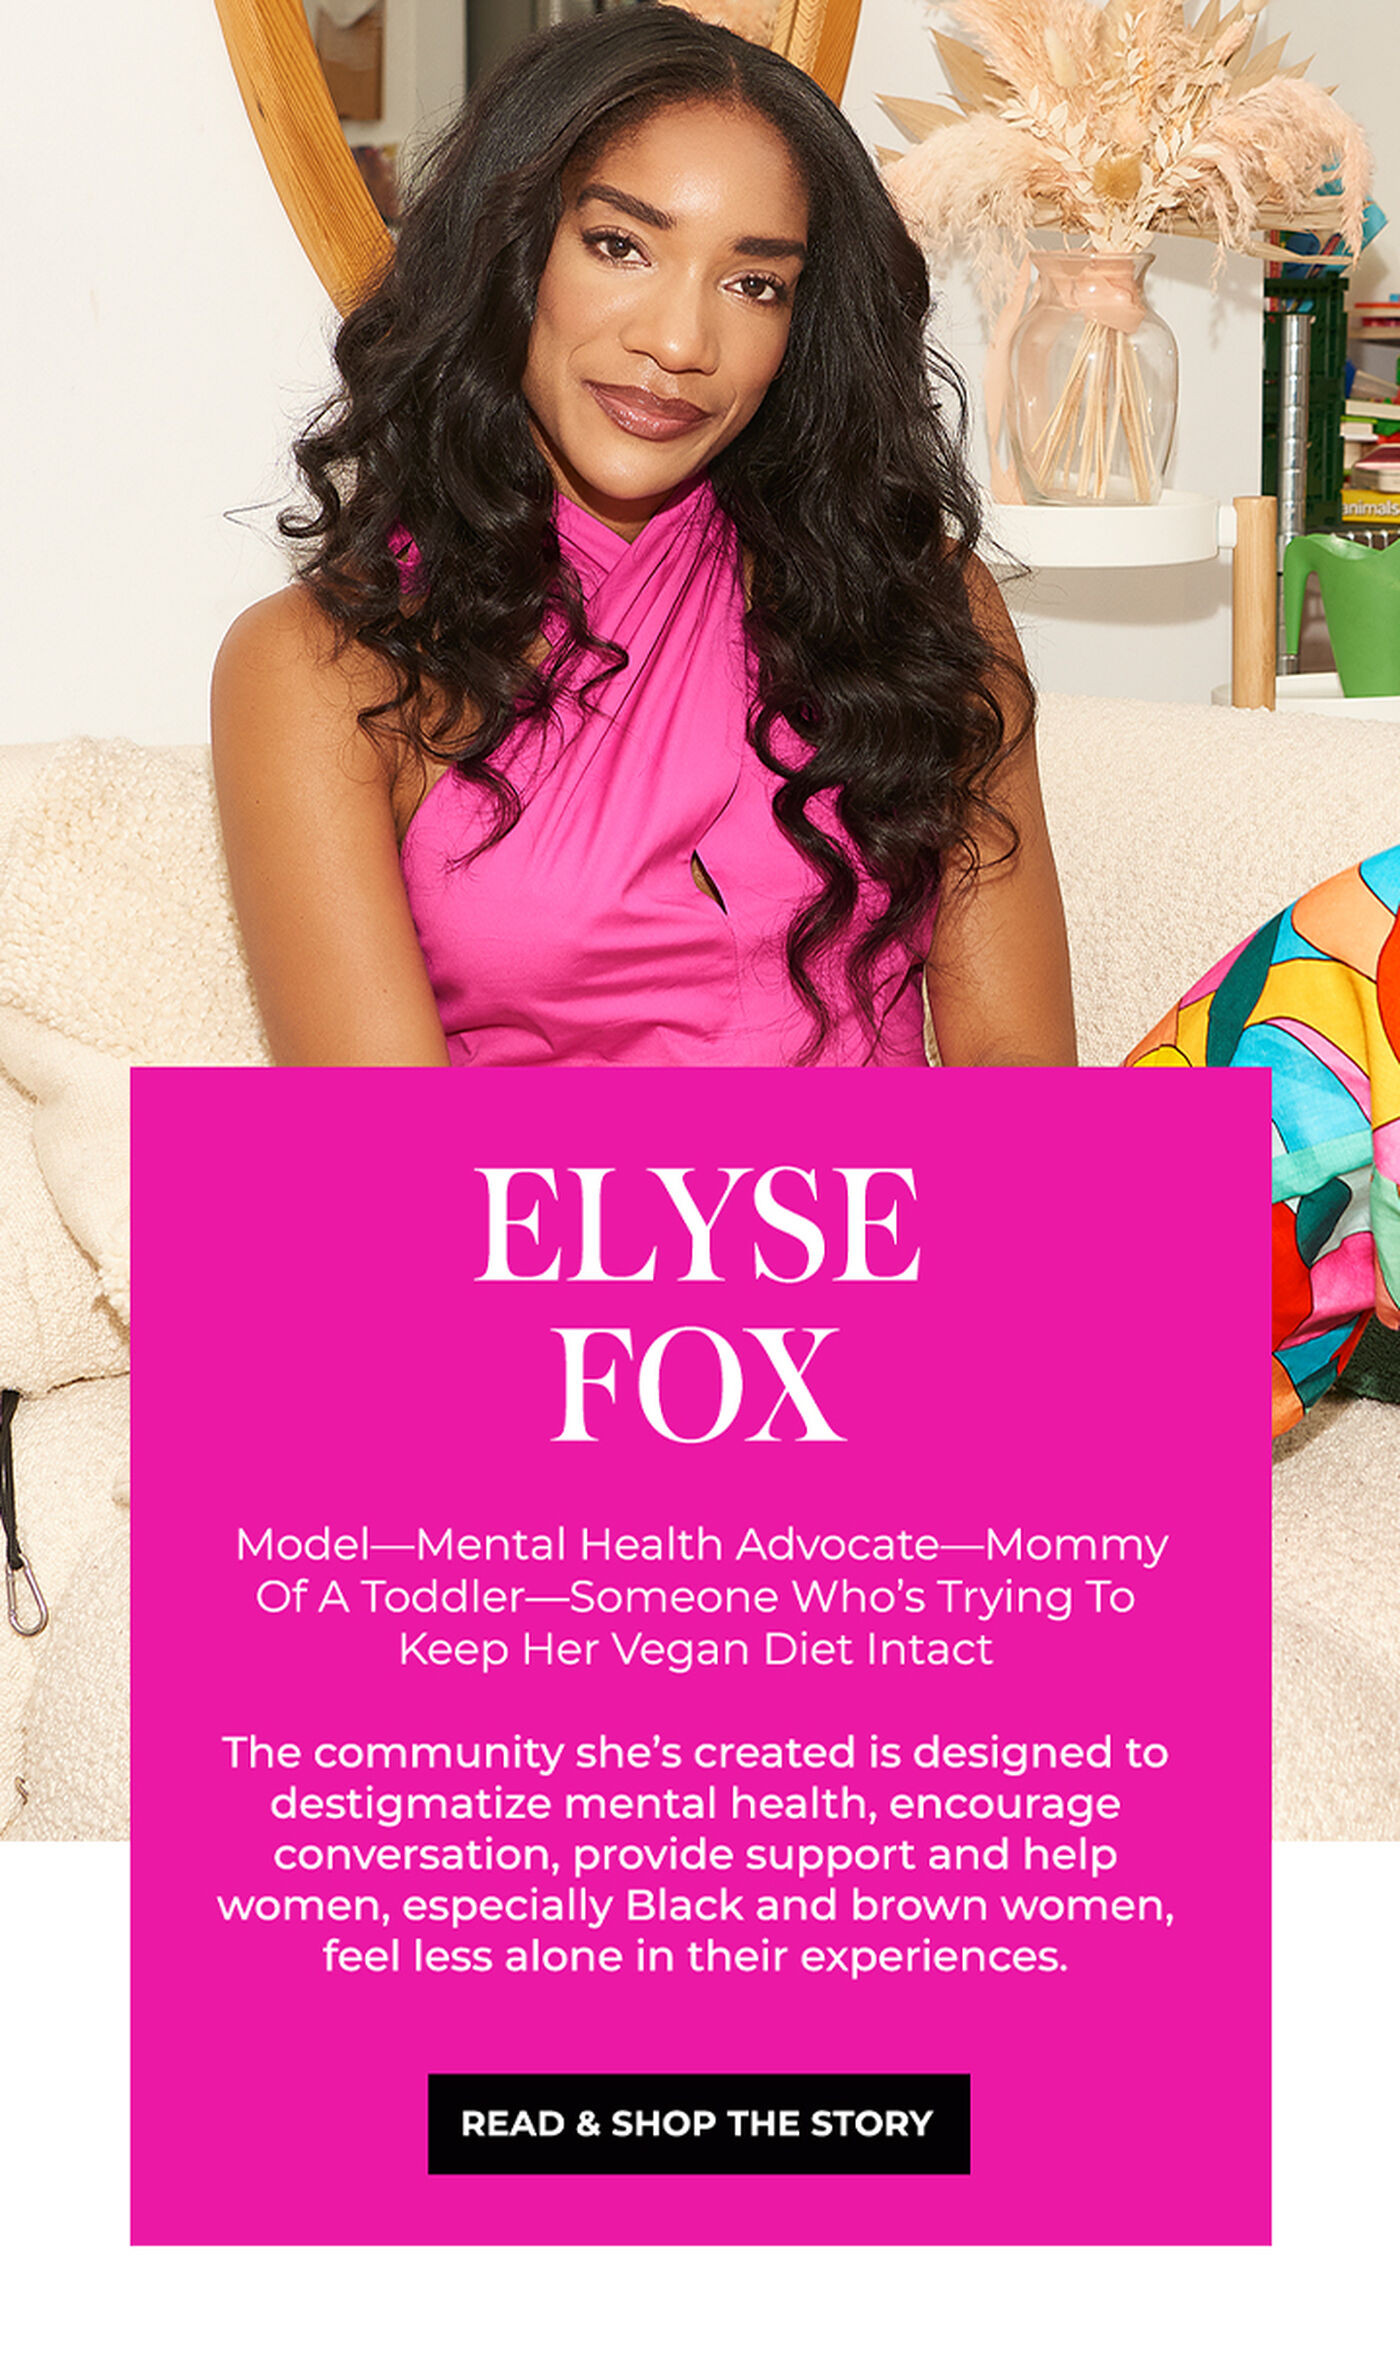 "ELYSE FOX Model-Mental Health Advocate-Mommy Of A Toddler-Someone Who's Trying To Keep Her Vegan Diet Intact The community she's created is designed to destigmatize mental health, encourage conversation, provide support and help women, especially Black and brown women, feel less alone in their experiences."